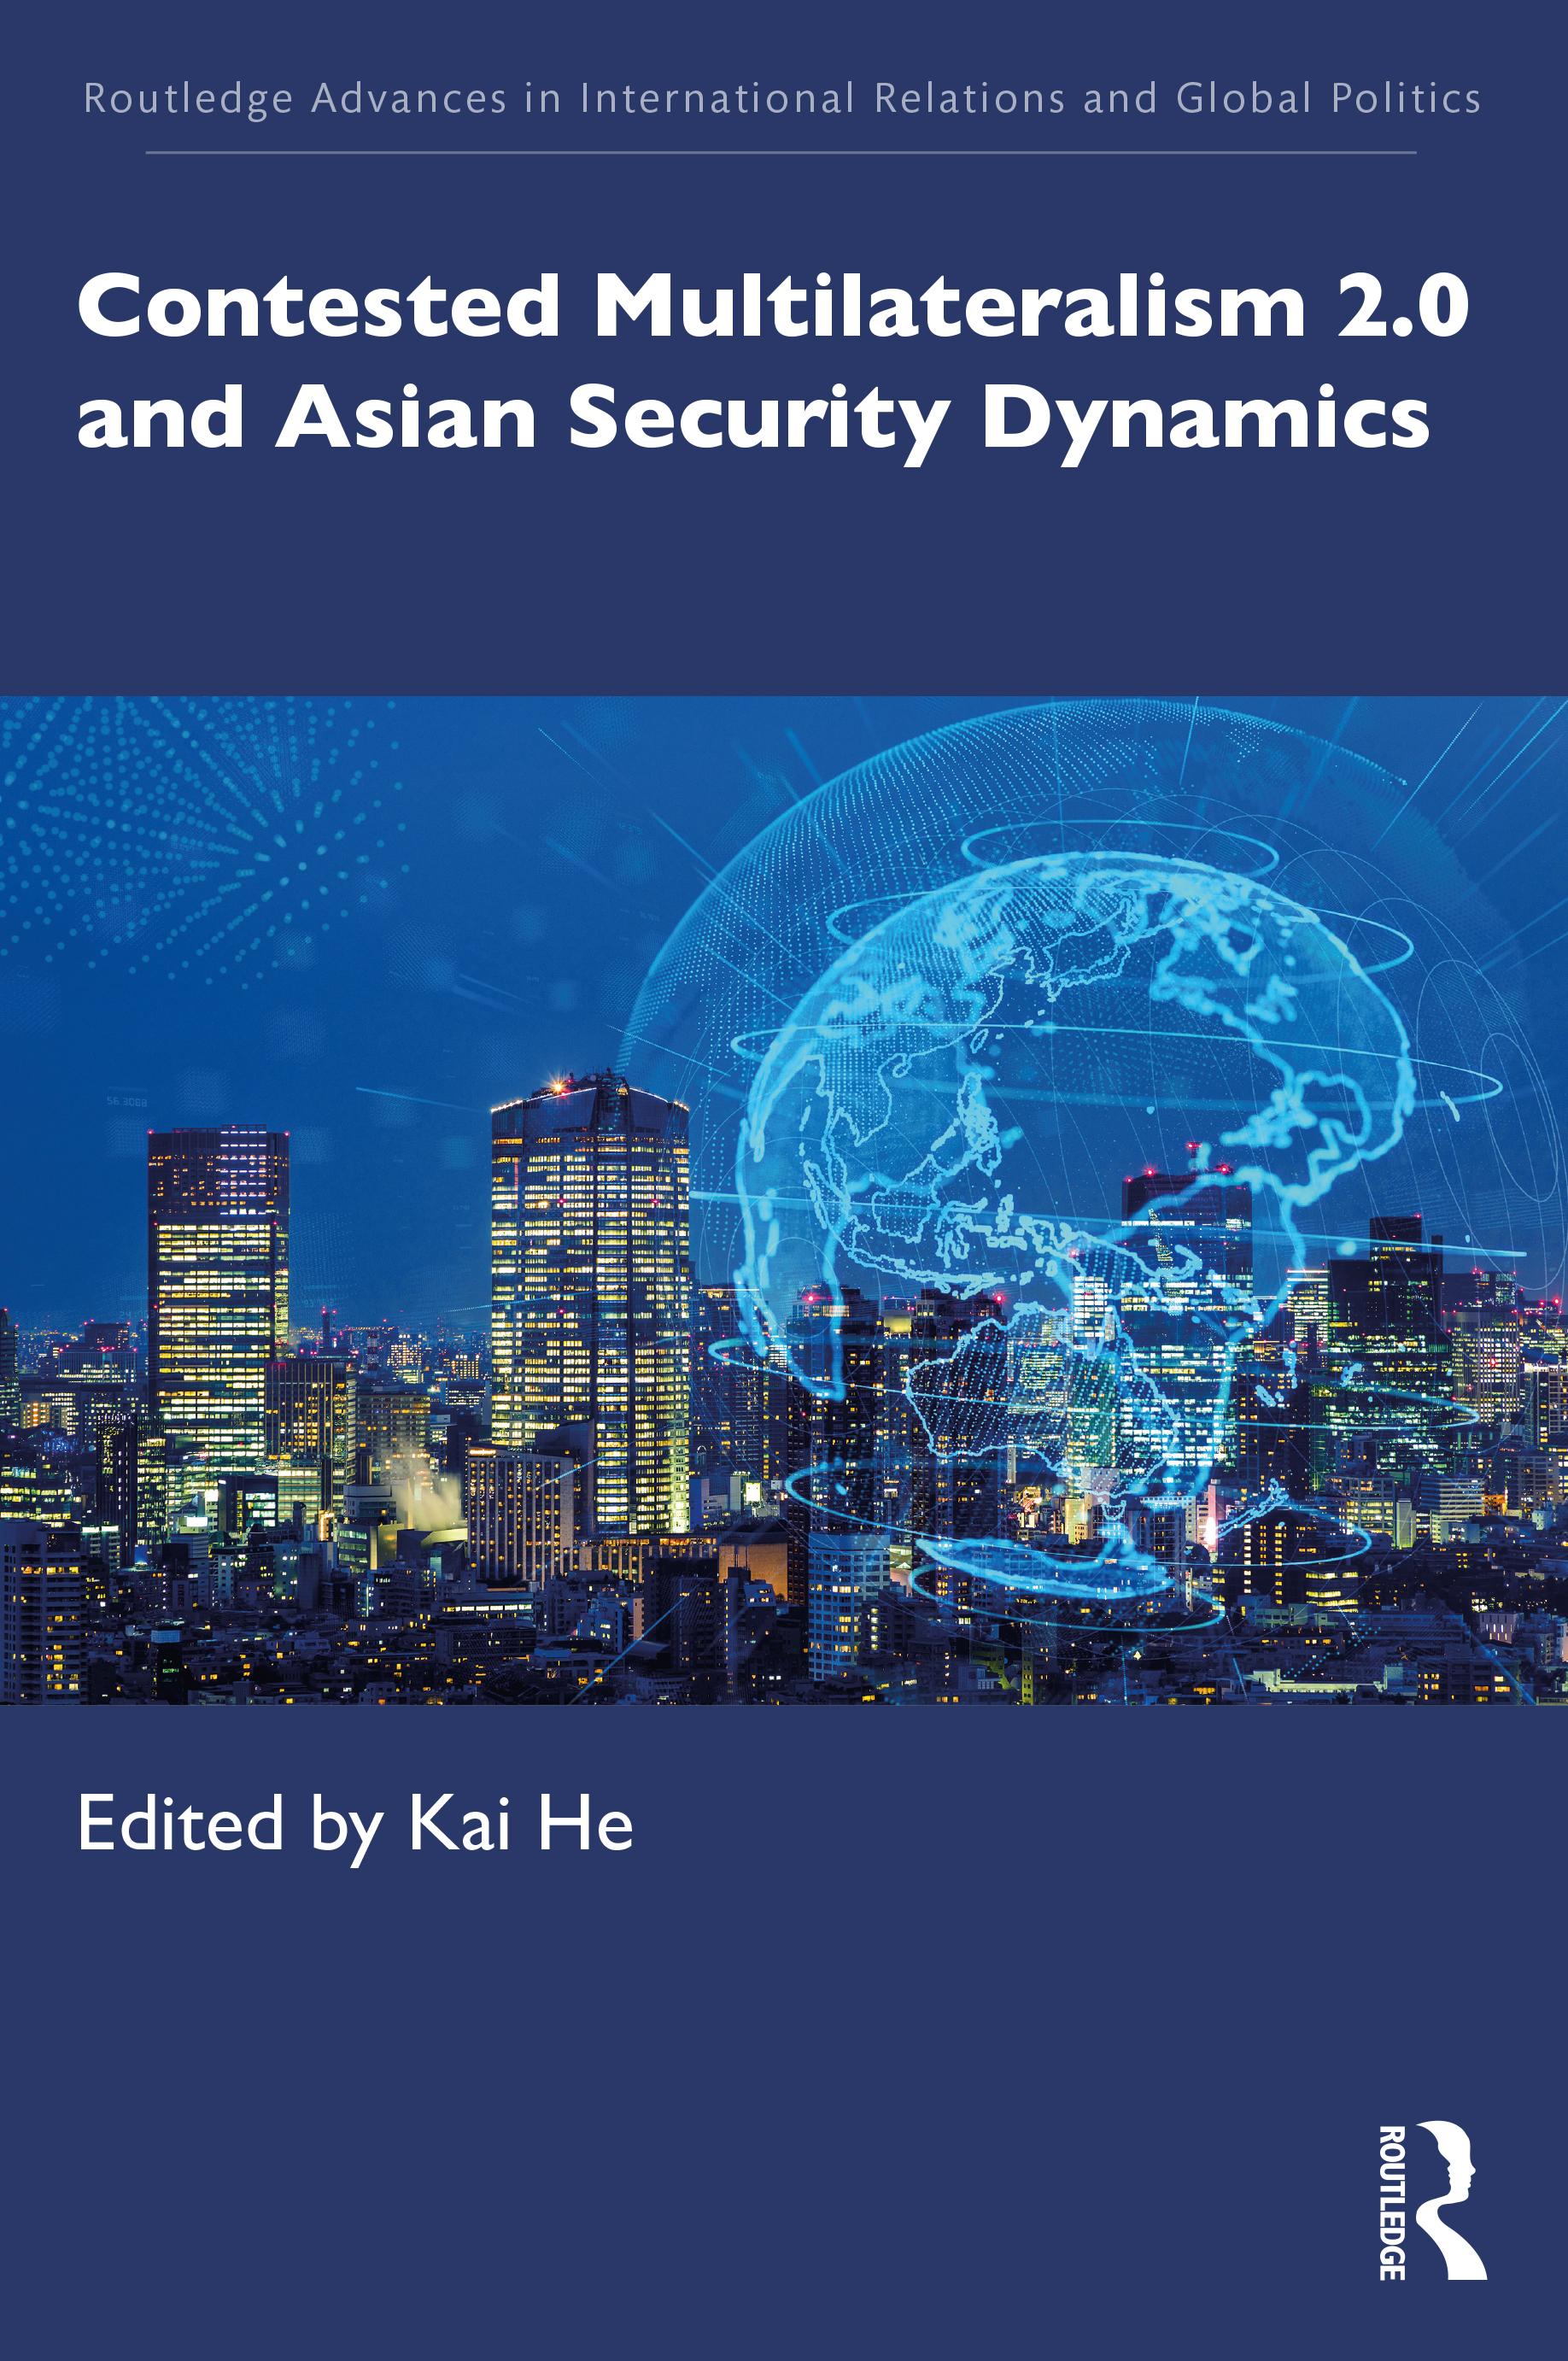 Contested Multilateralism 2.0 and Asian Security Dynamics